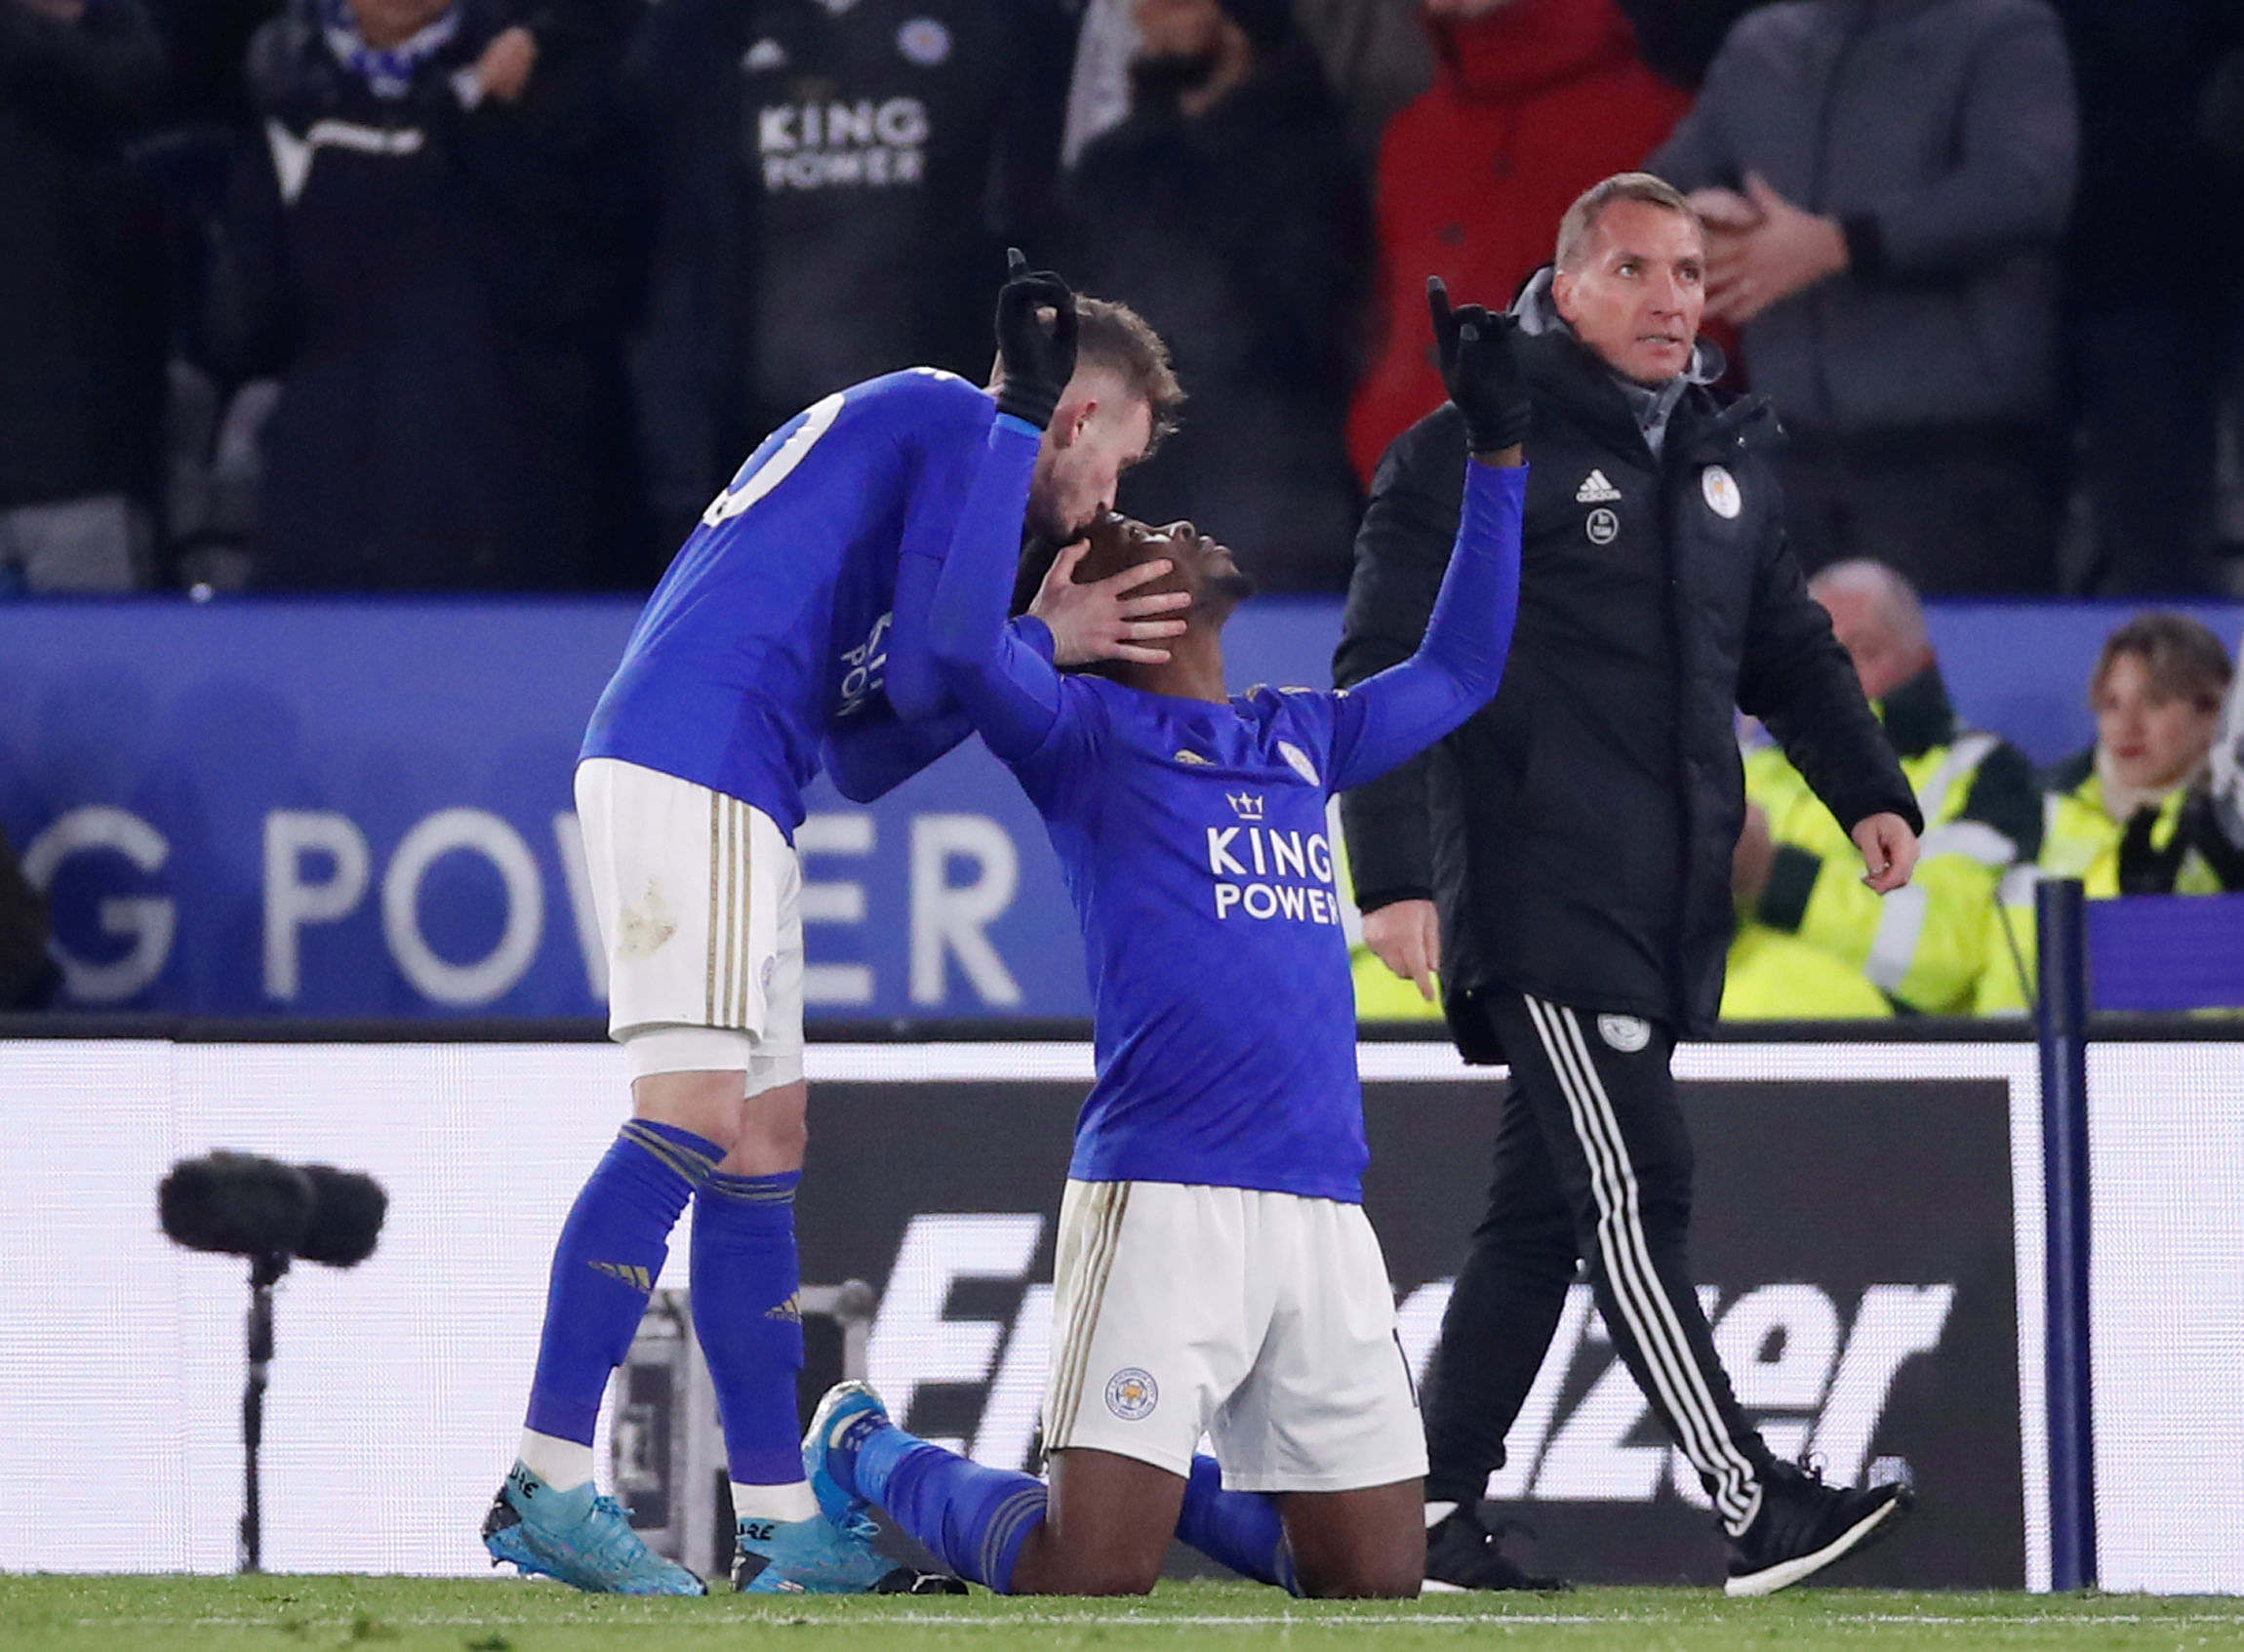 Leicester City's Kelechi Iheanacho celebrates scoring their second goal with James Maddison and manager Brendan Rodgers. (Reuters Photo)